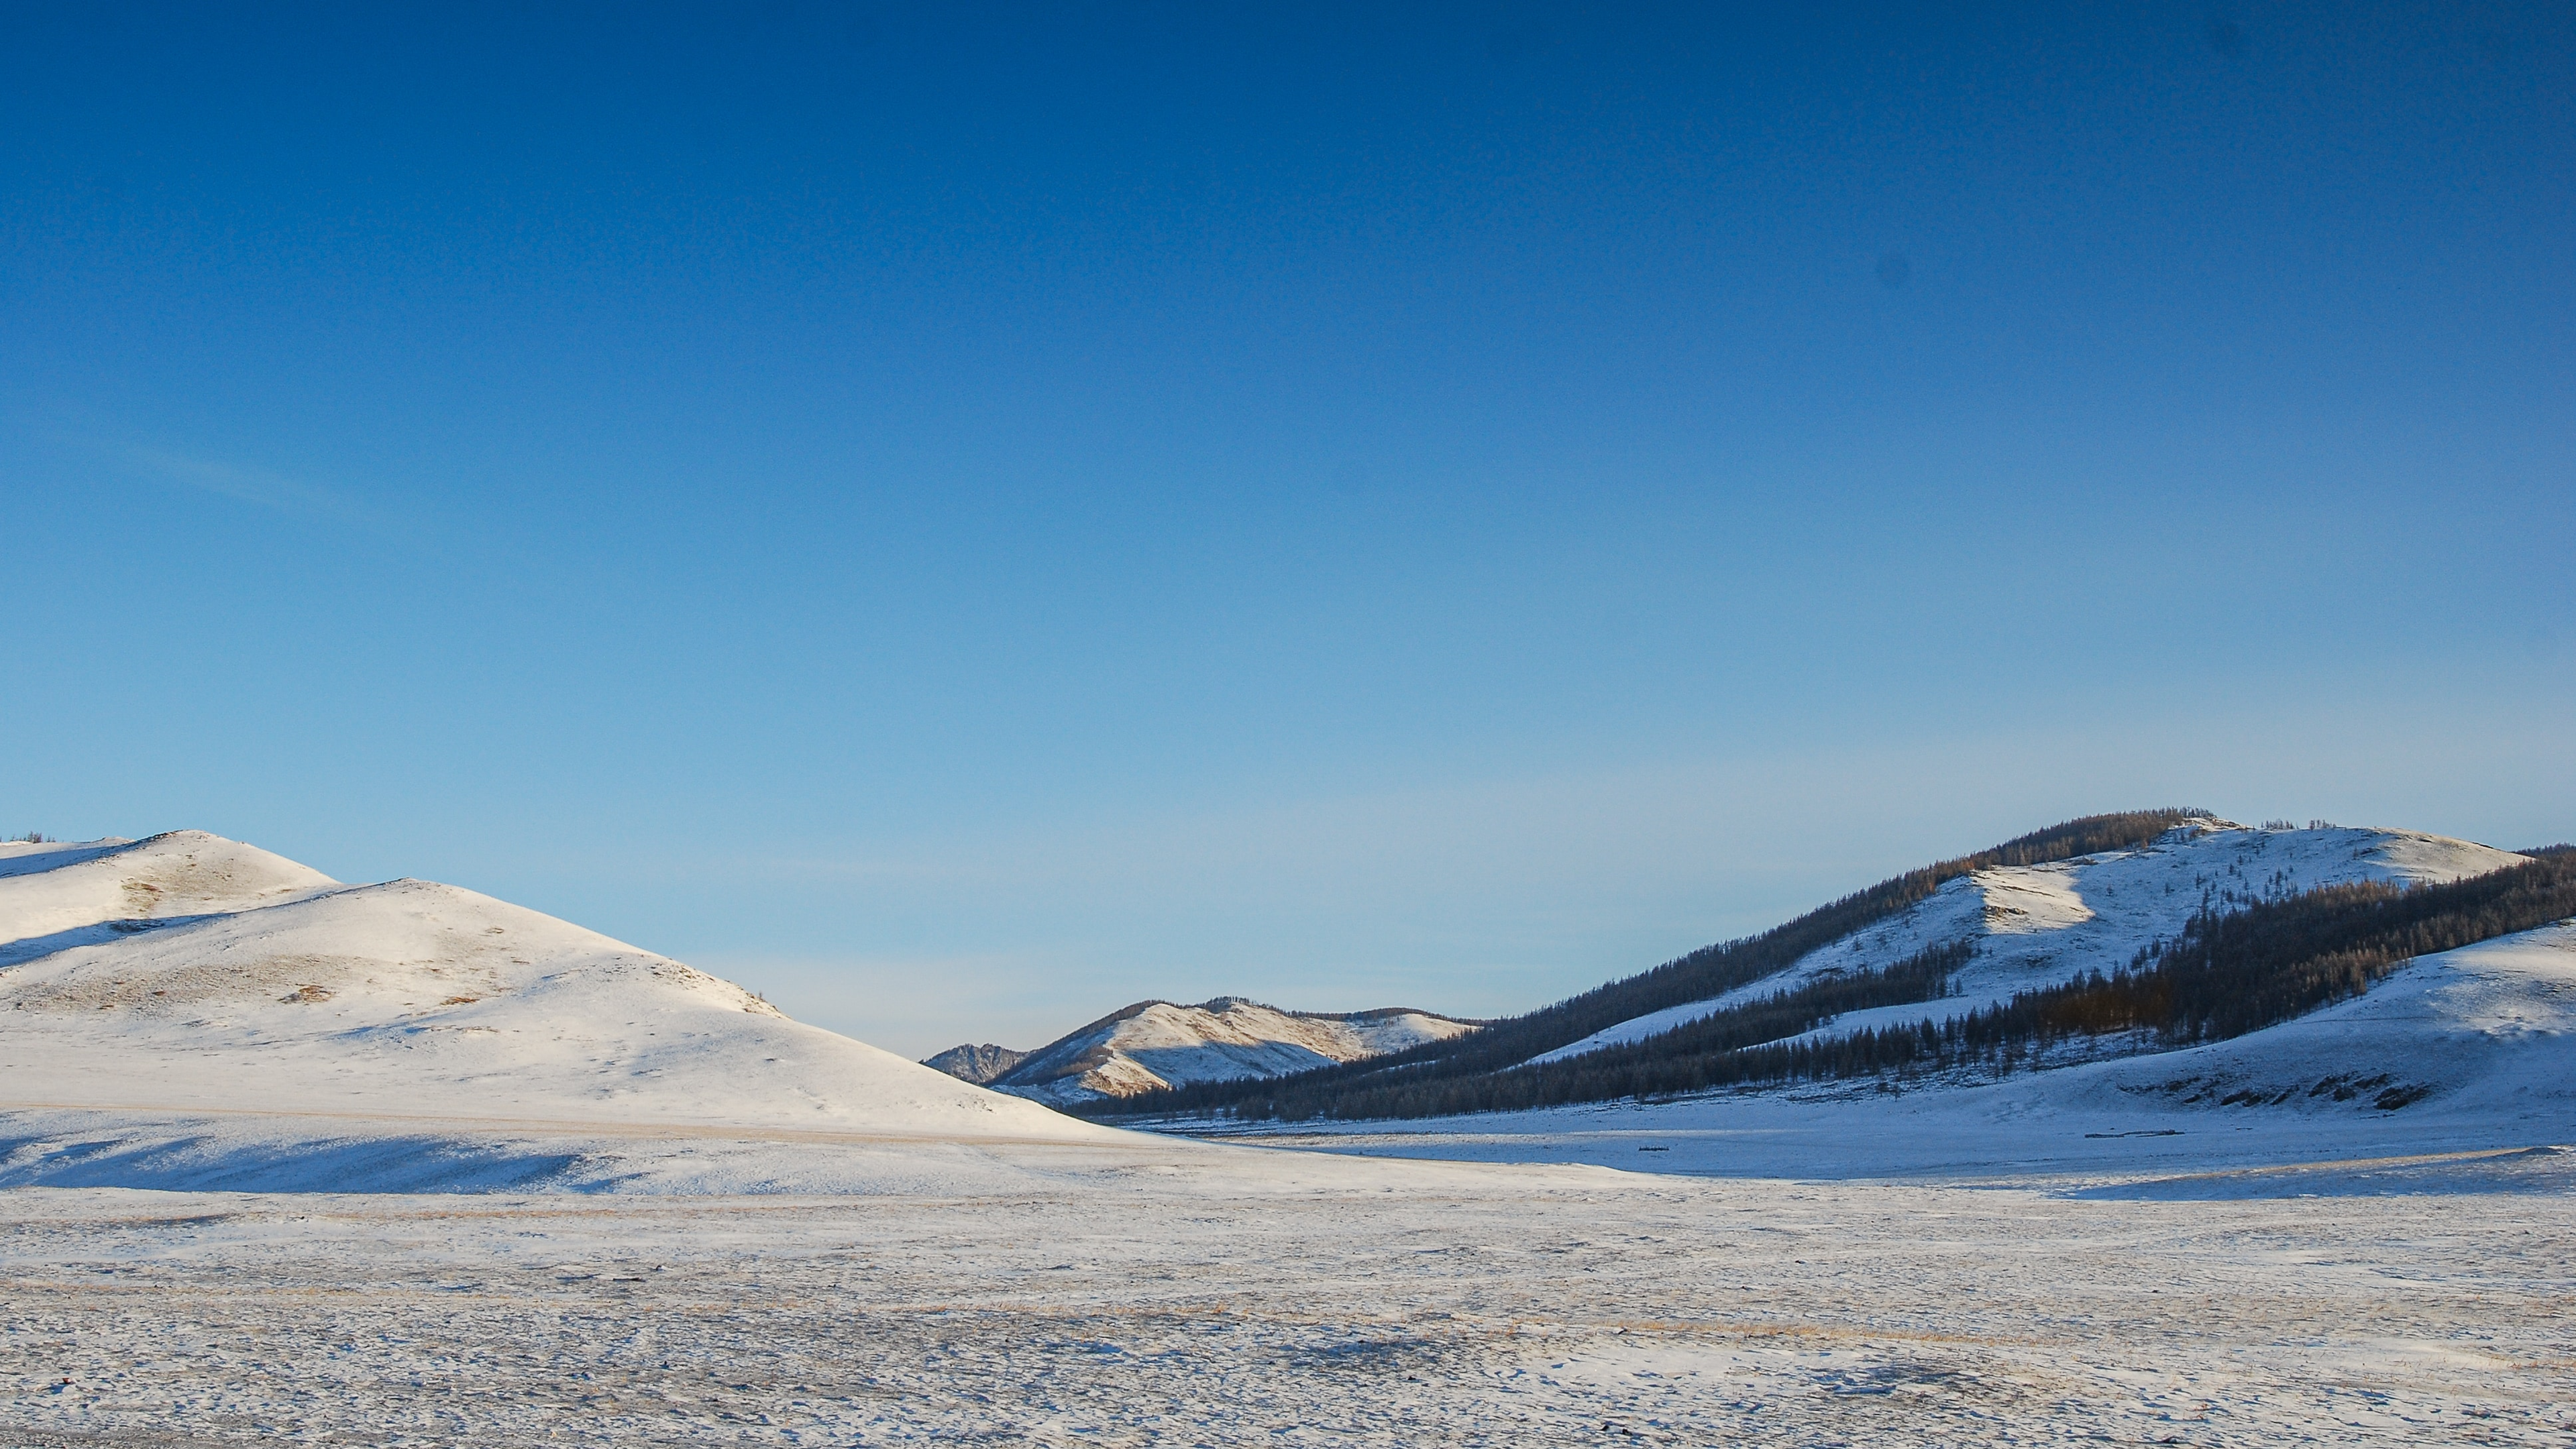 Mongolia is also known as the land of blue sky